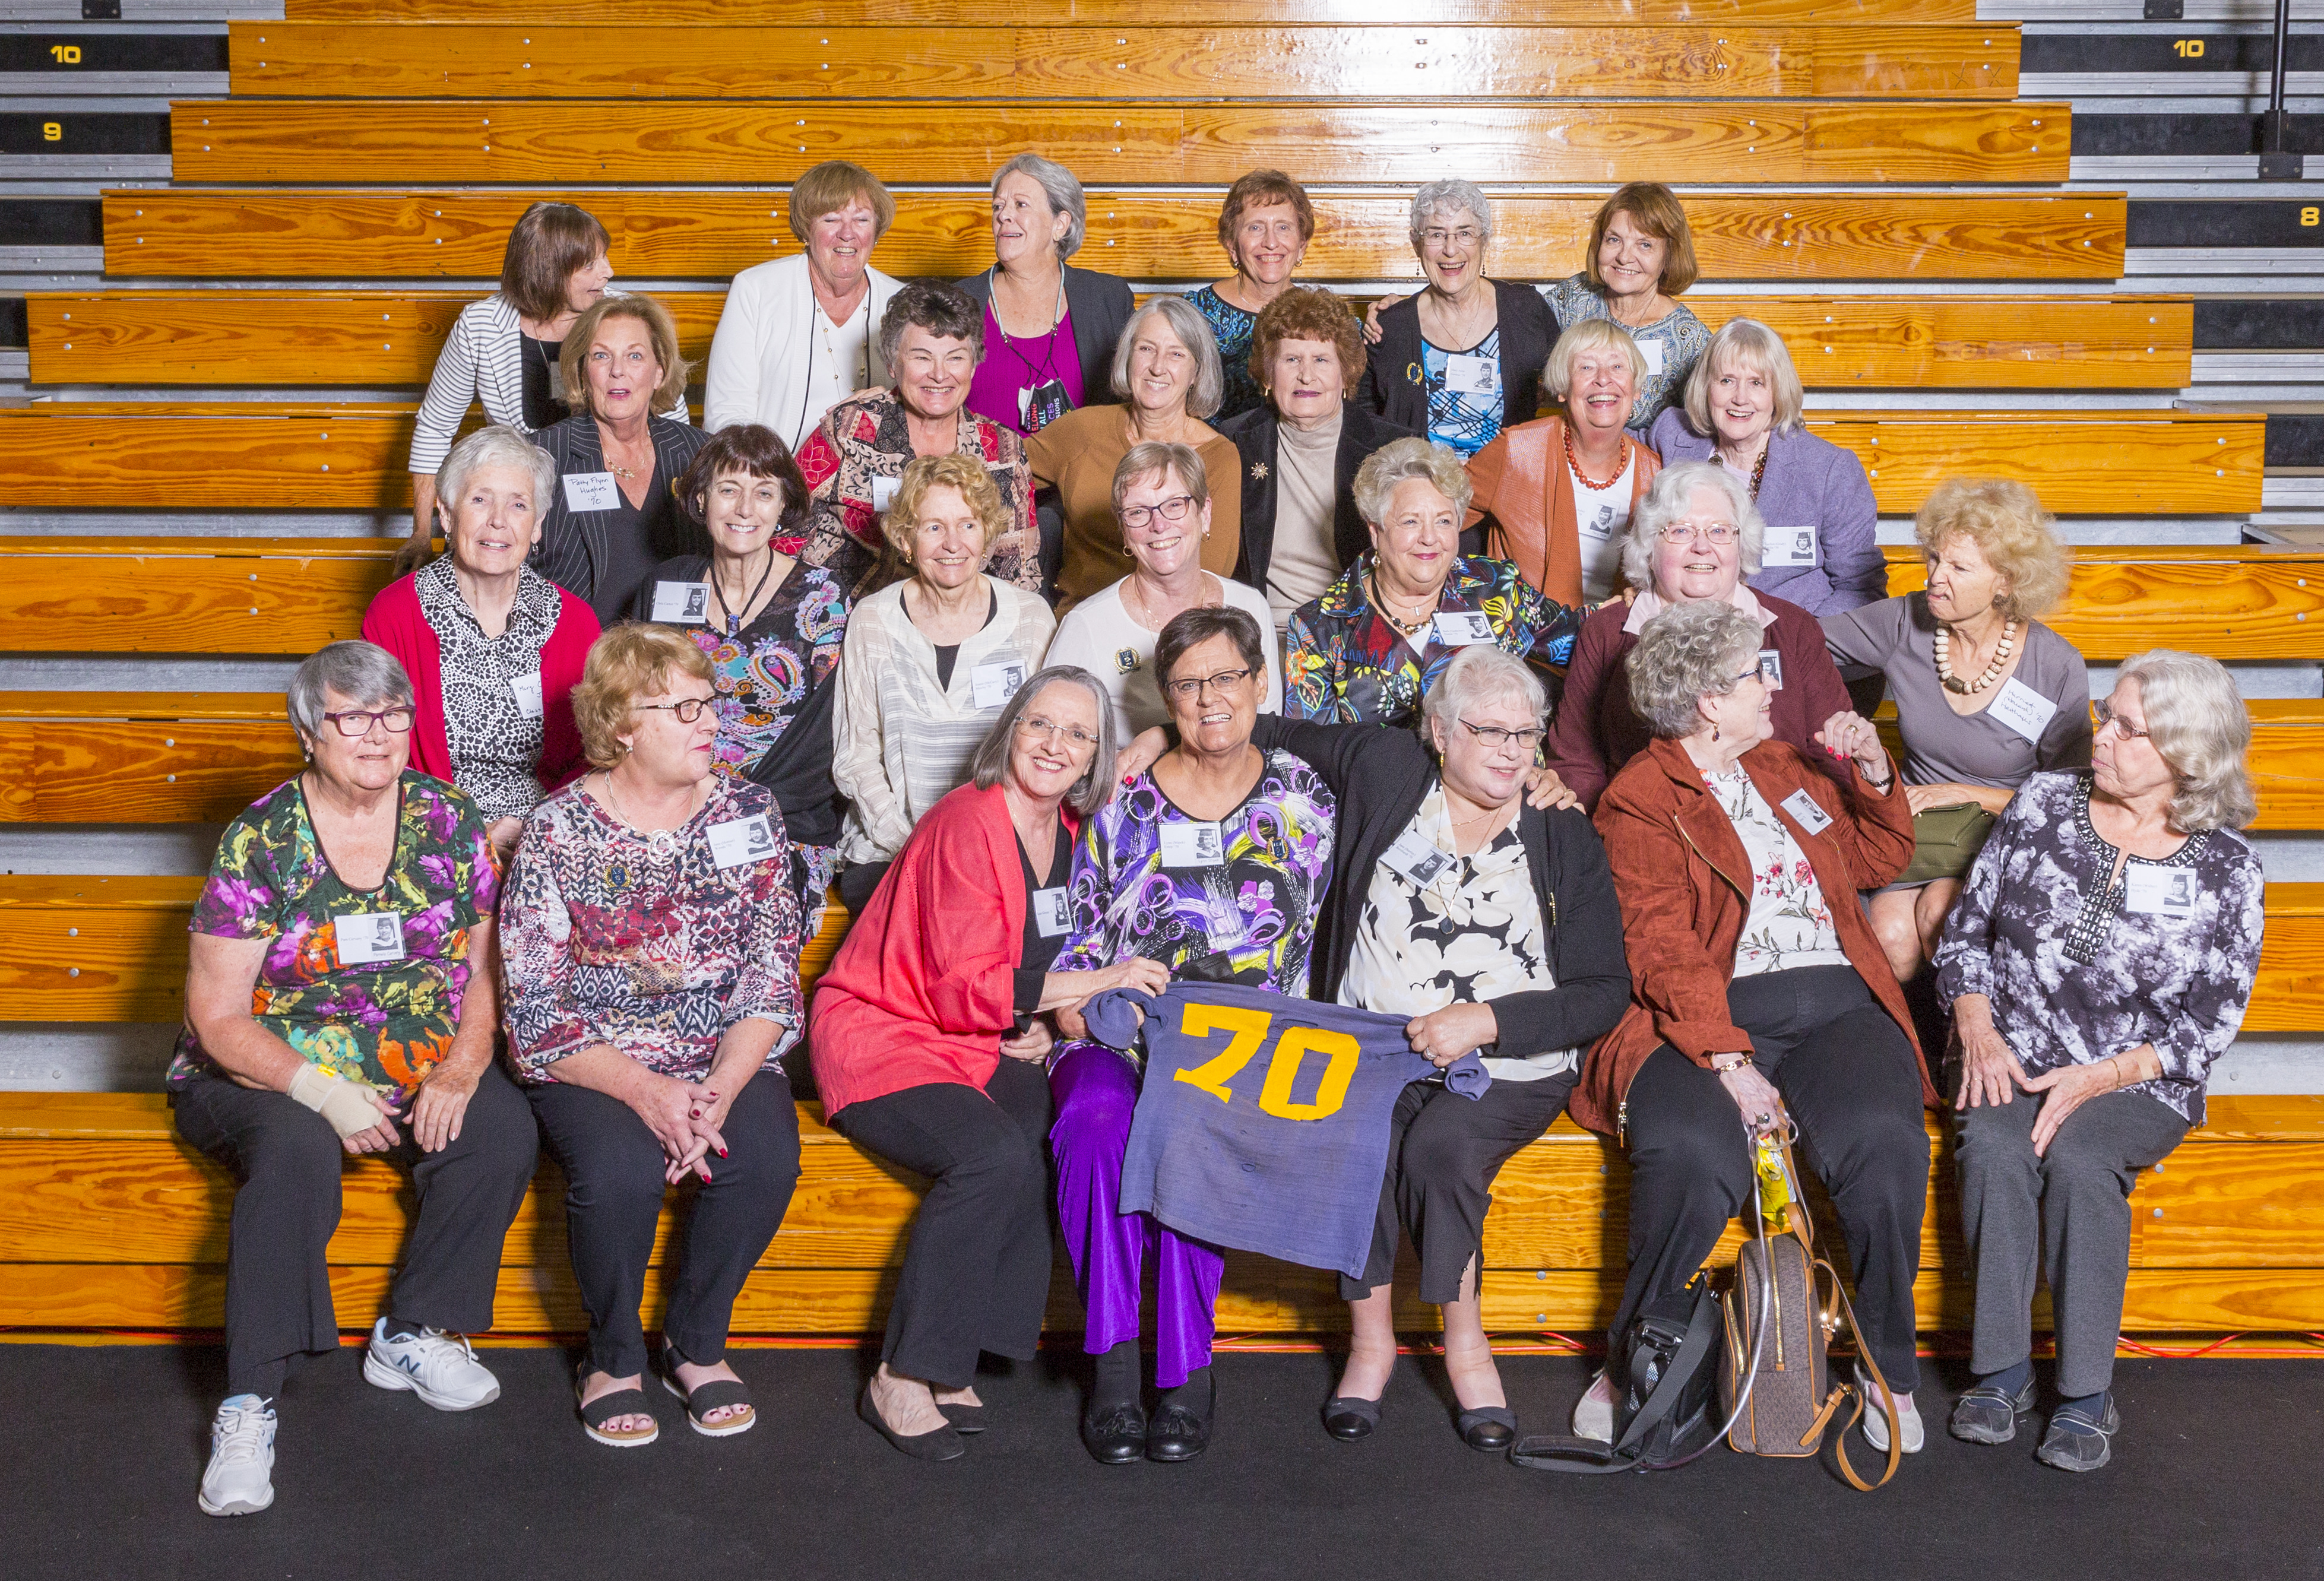 Group photo of the Class of 1970